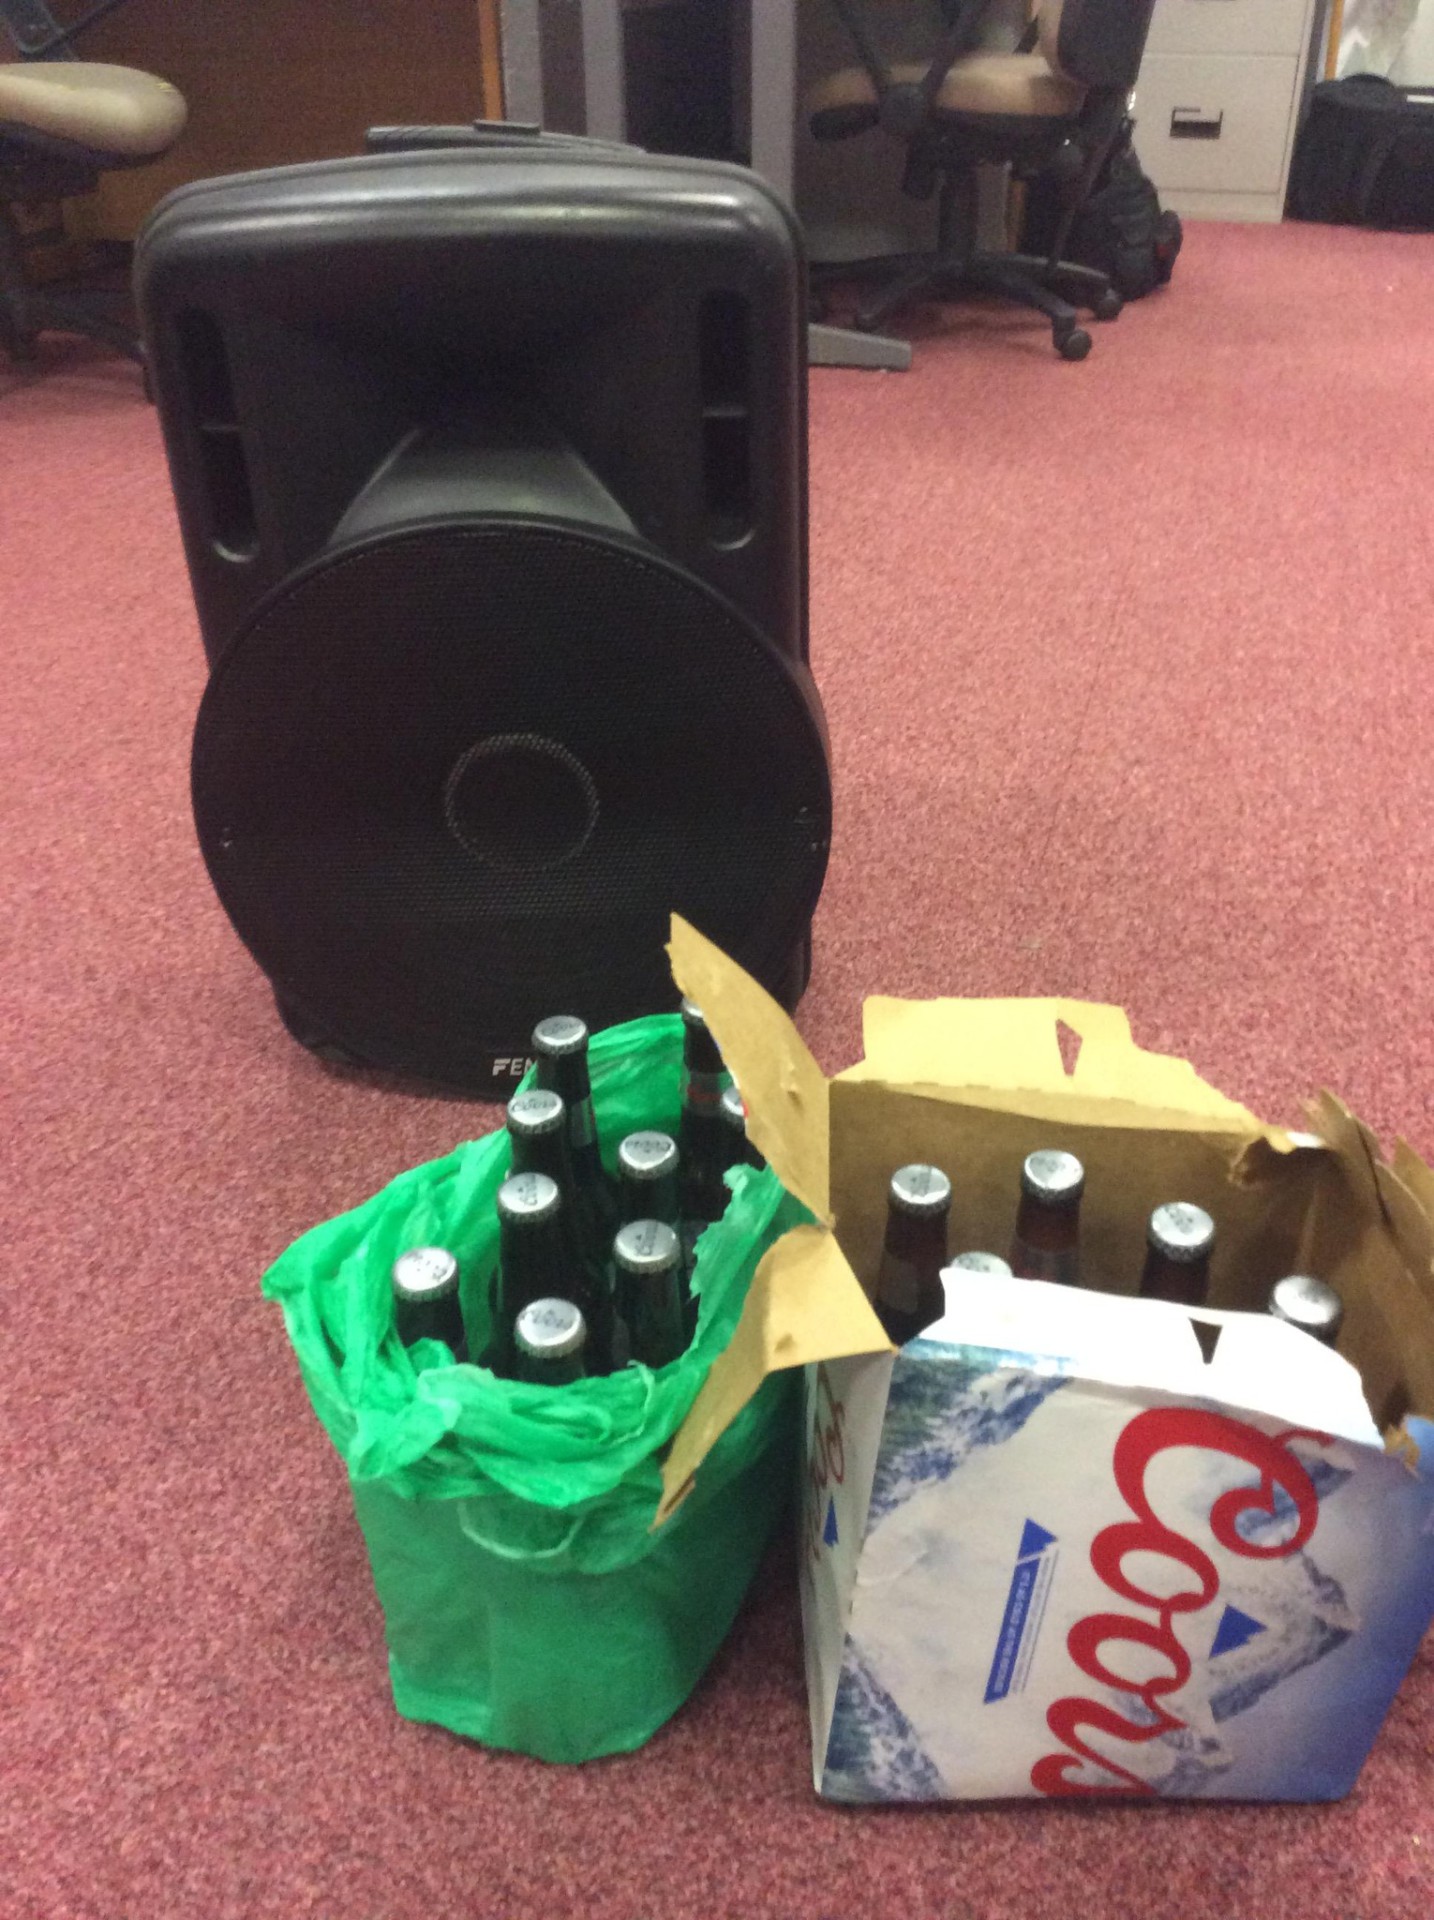 Police seize speaker in Omagh following noise complaints